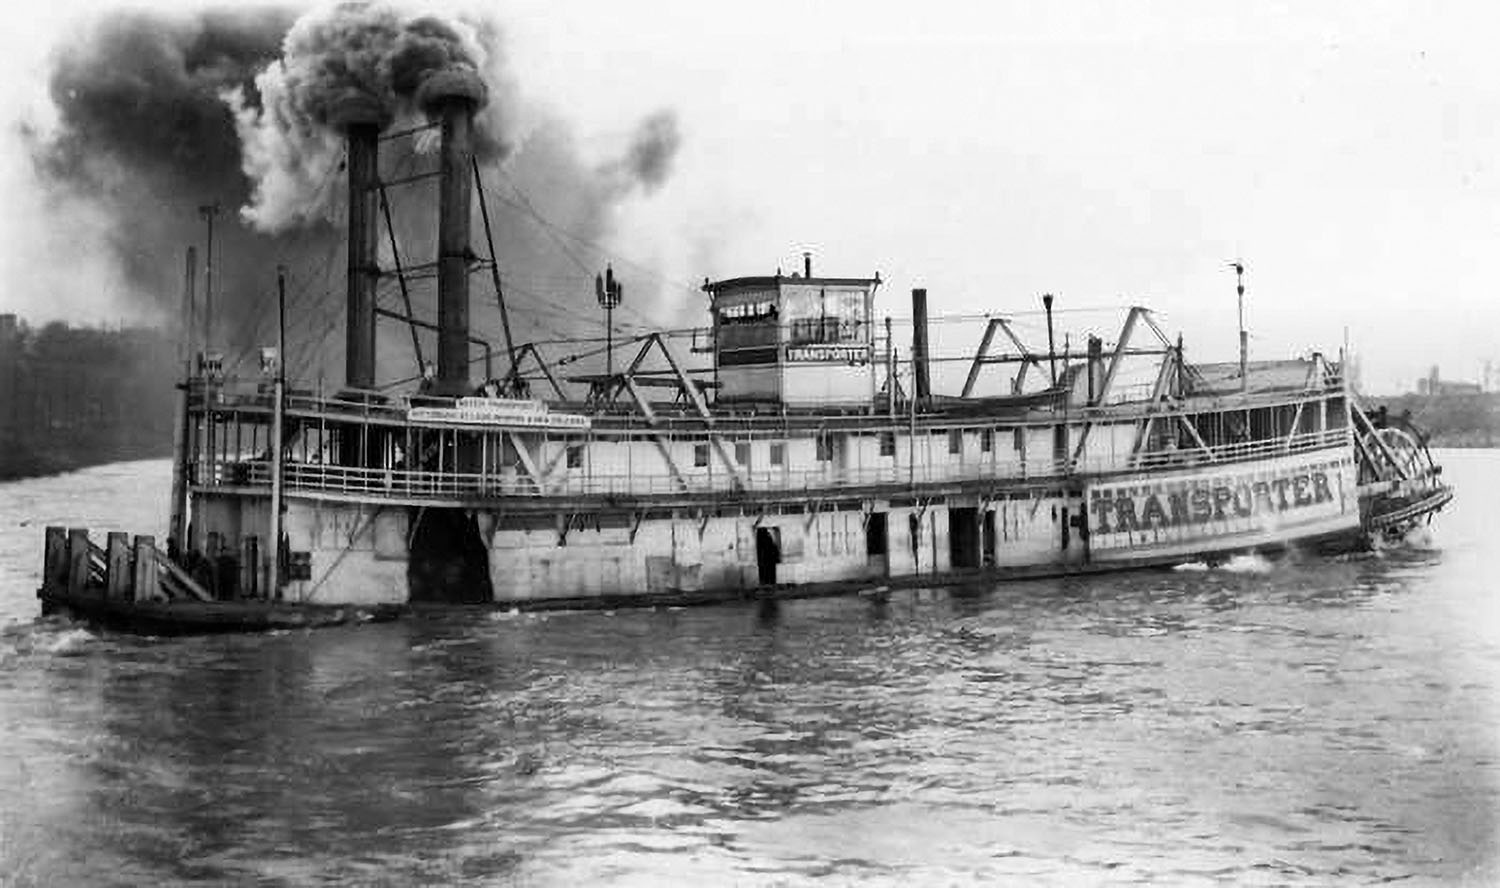 Str. Transporter on trials after rebuilding in 1921. (Capt. W.S. Pollock photo, David Smith collection)